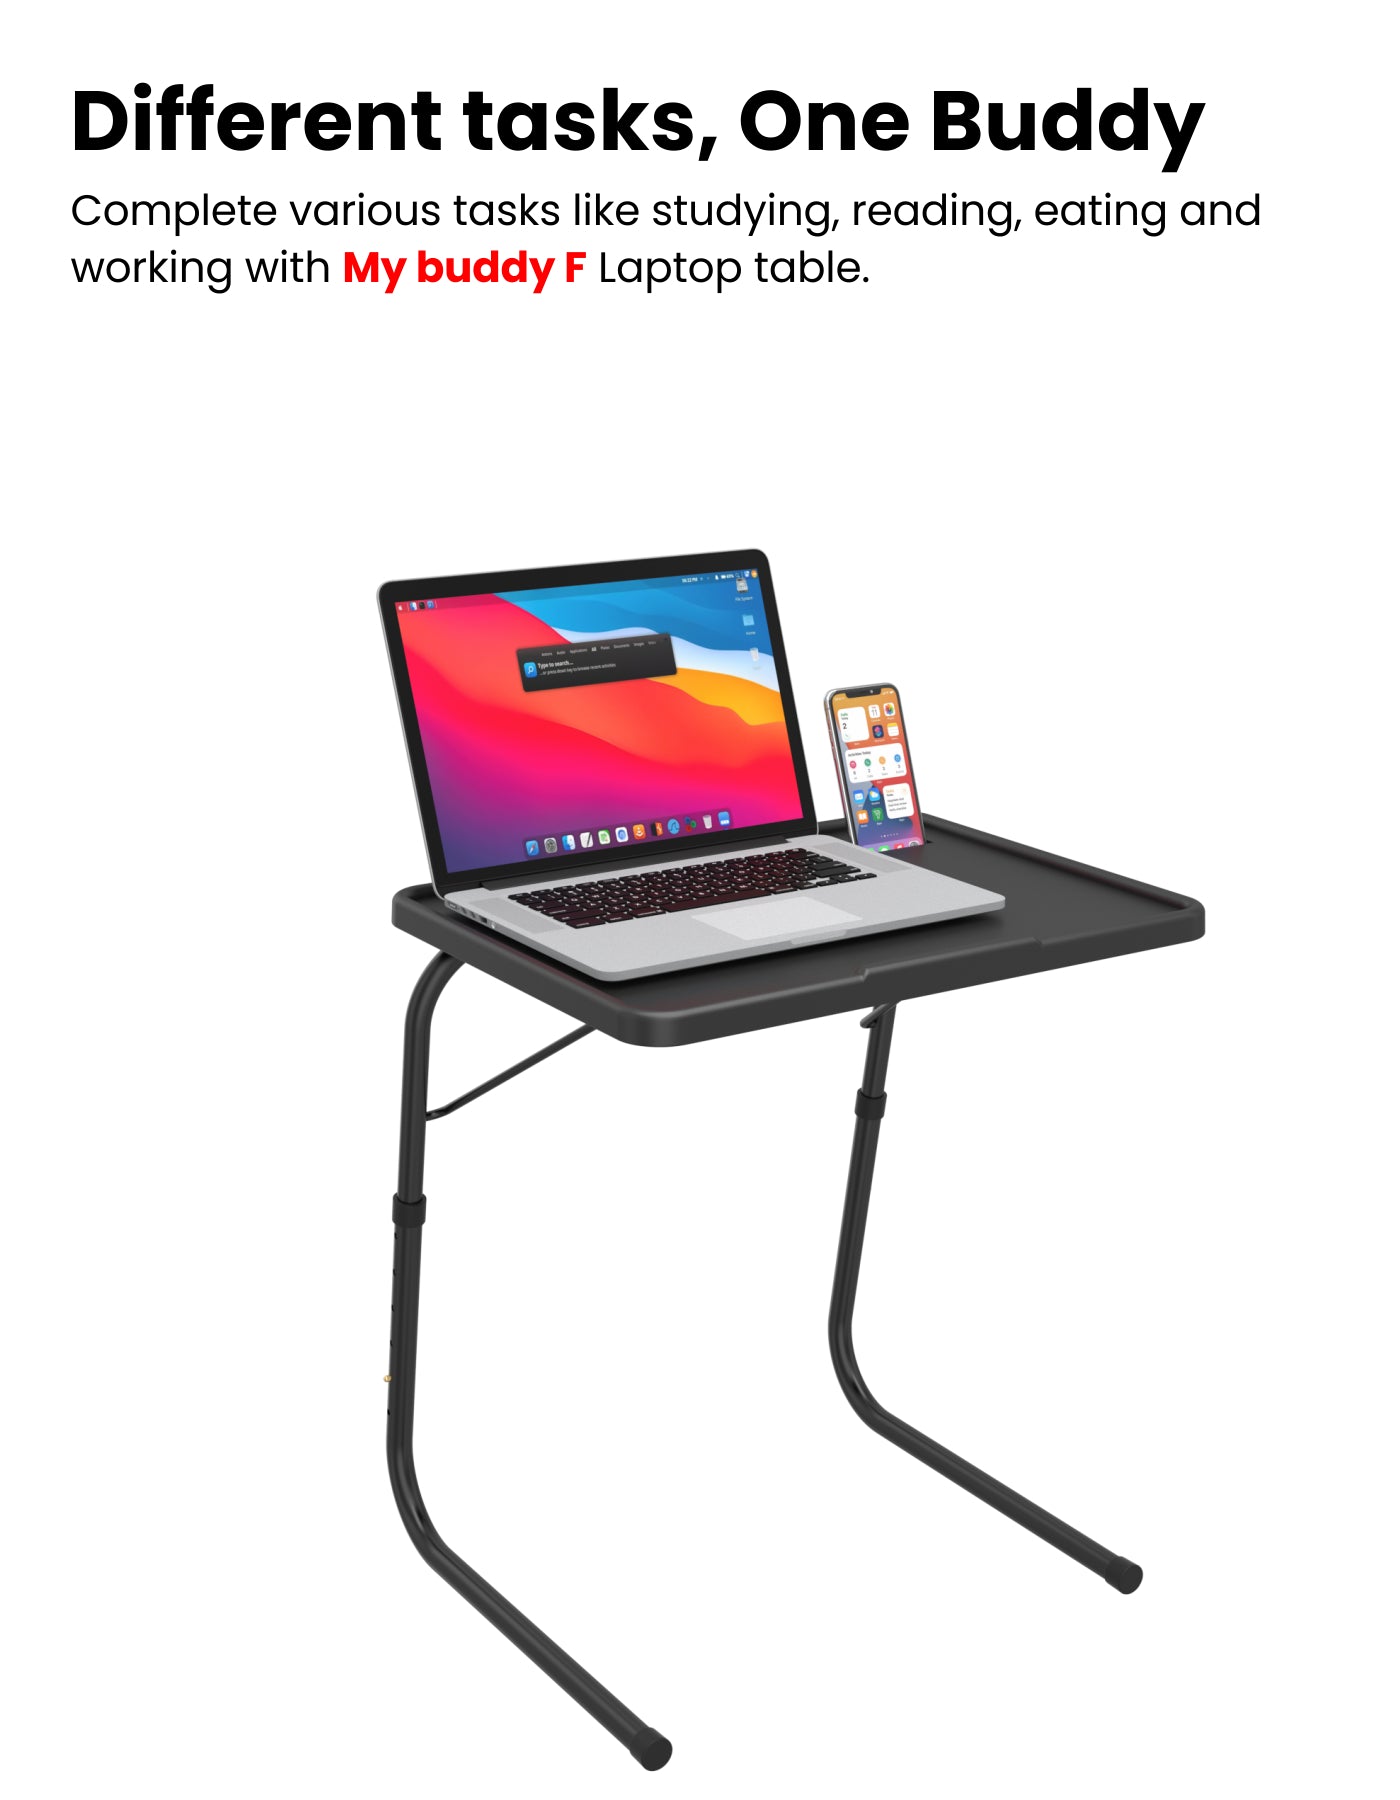 Portronics My Buddy F Portable Laptop Stand/Table for Bed adjustable and portable Laptop Stand for bed work without boundaries